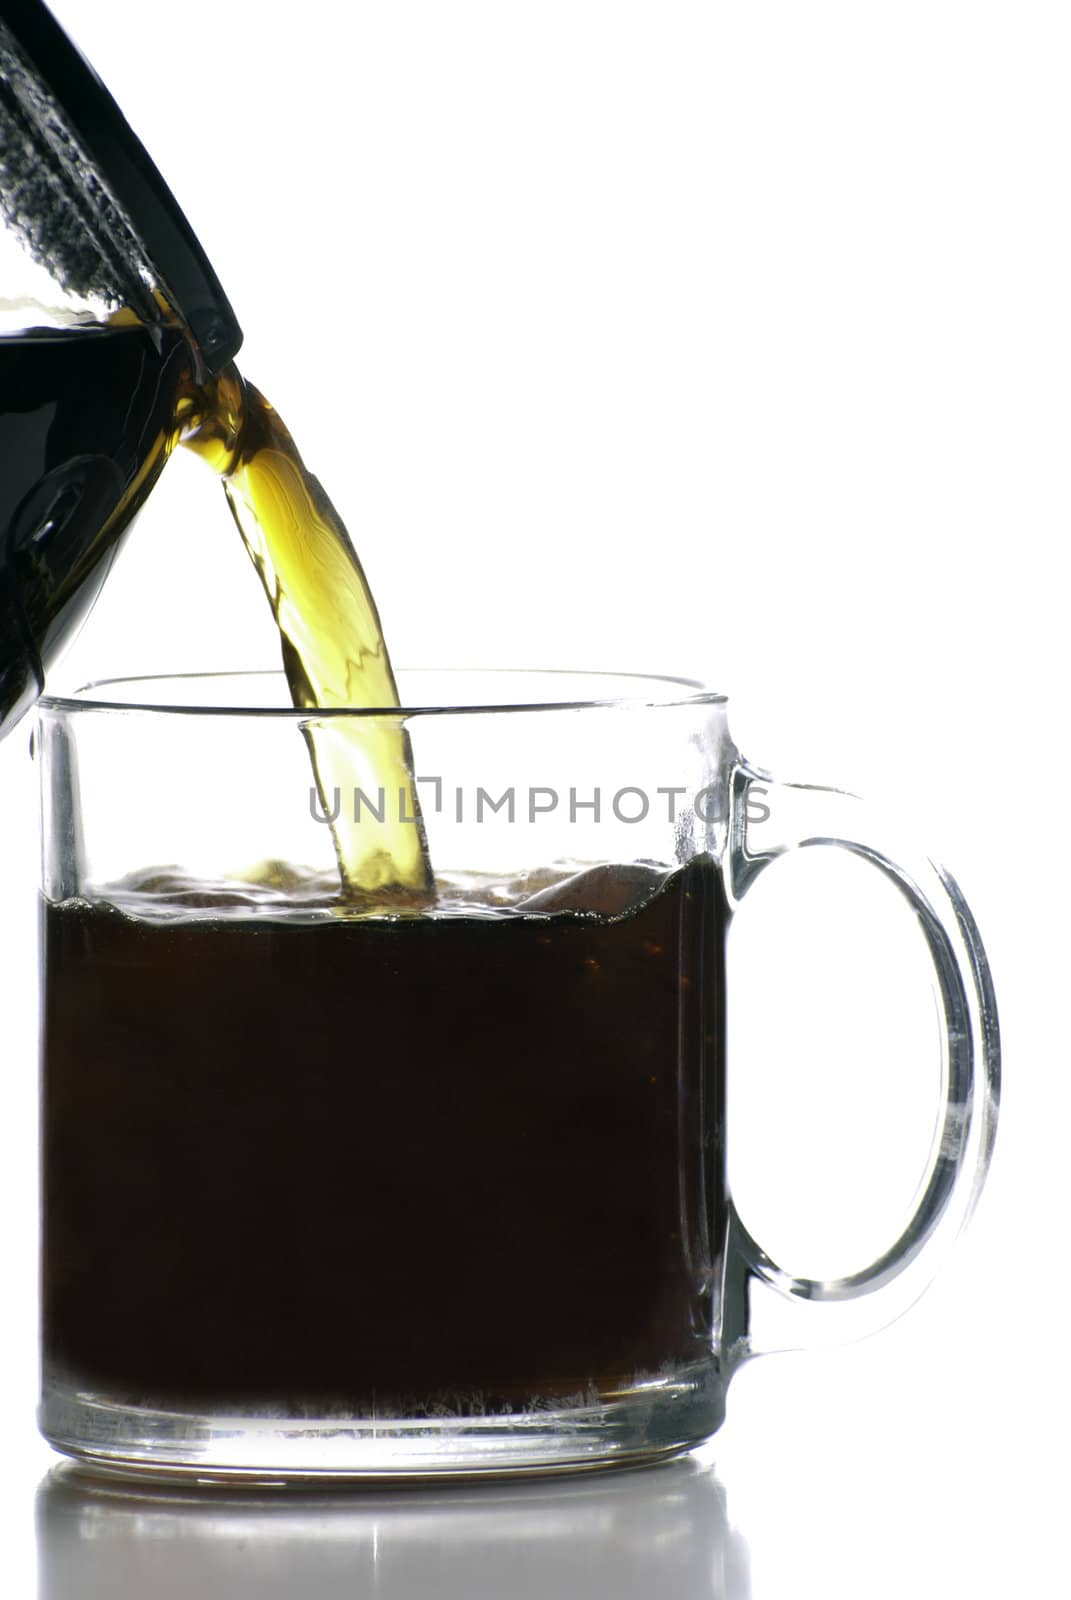 A morning coffee is being poured into a clear glass coffee cup, shot against a white background